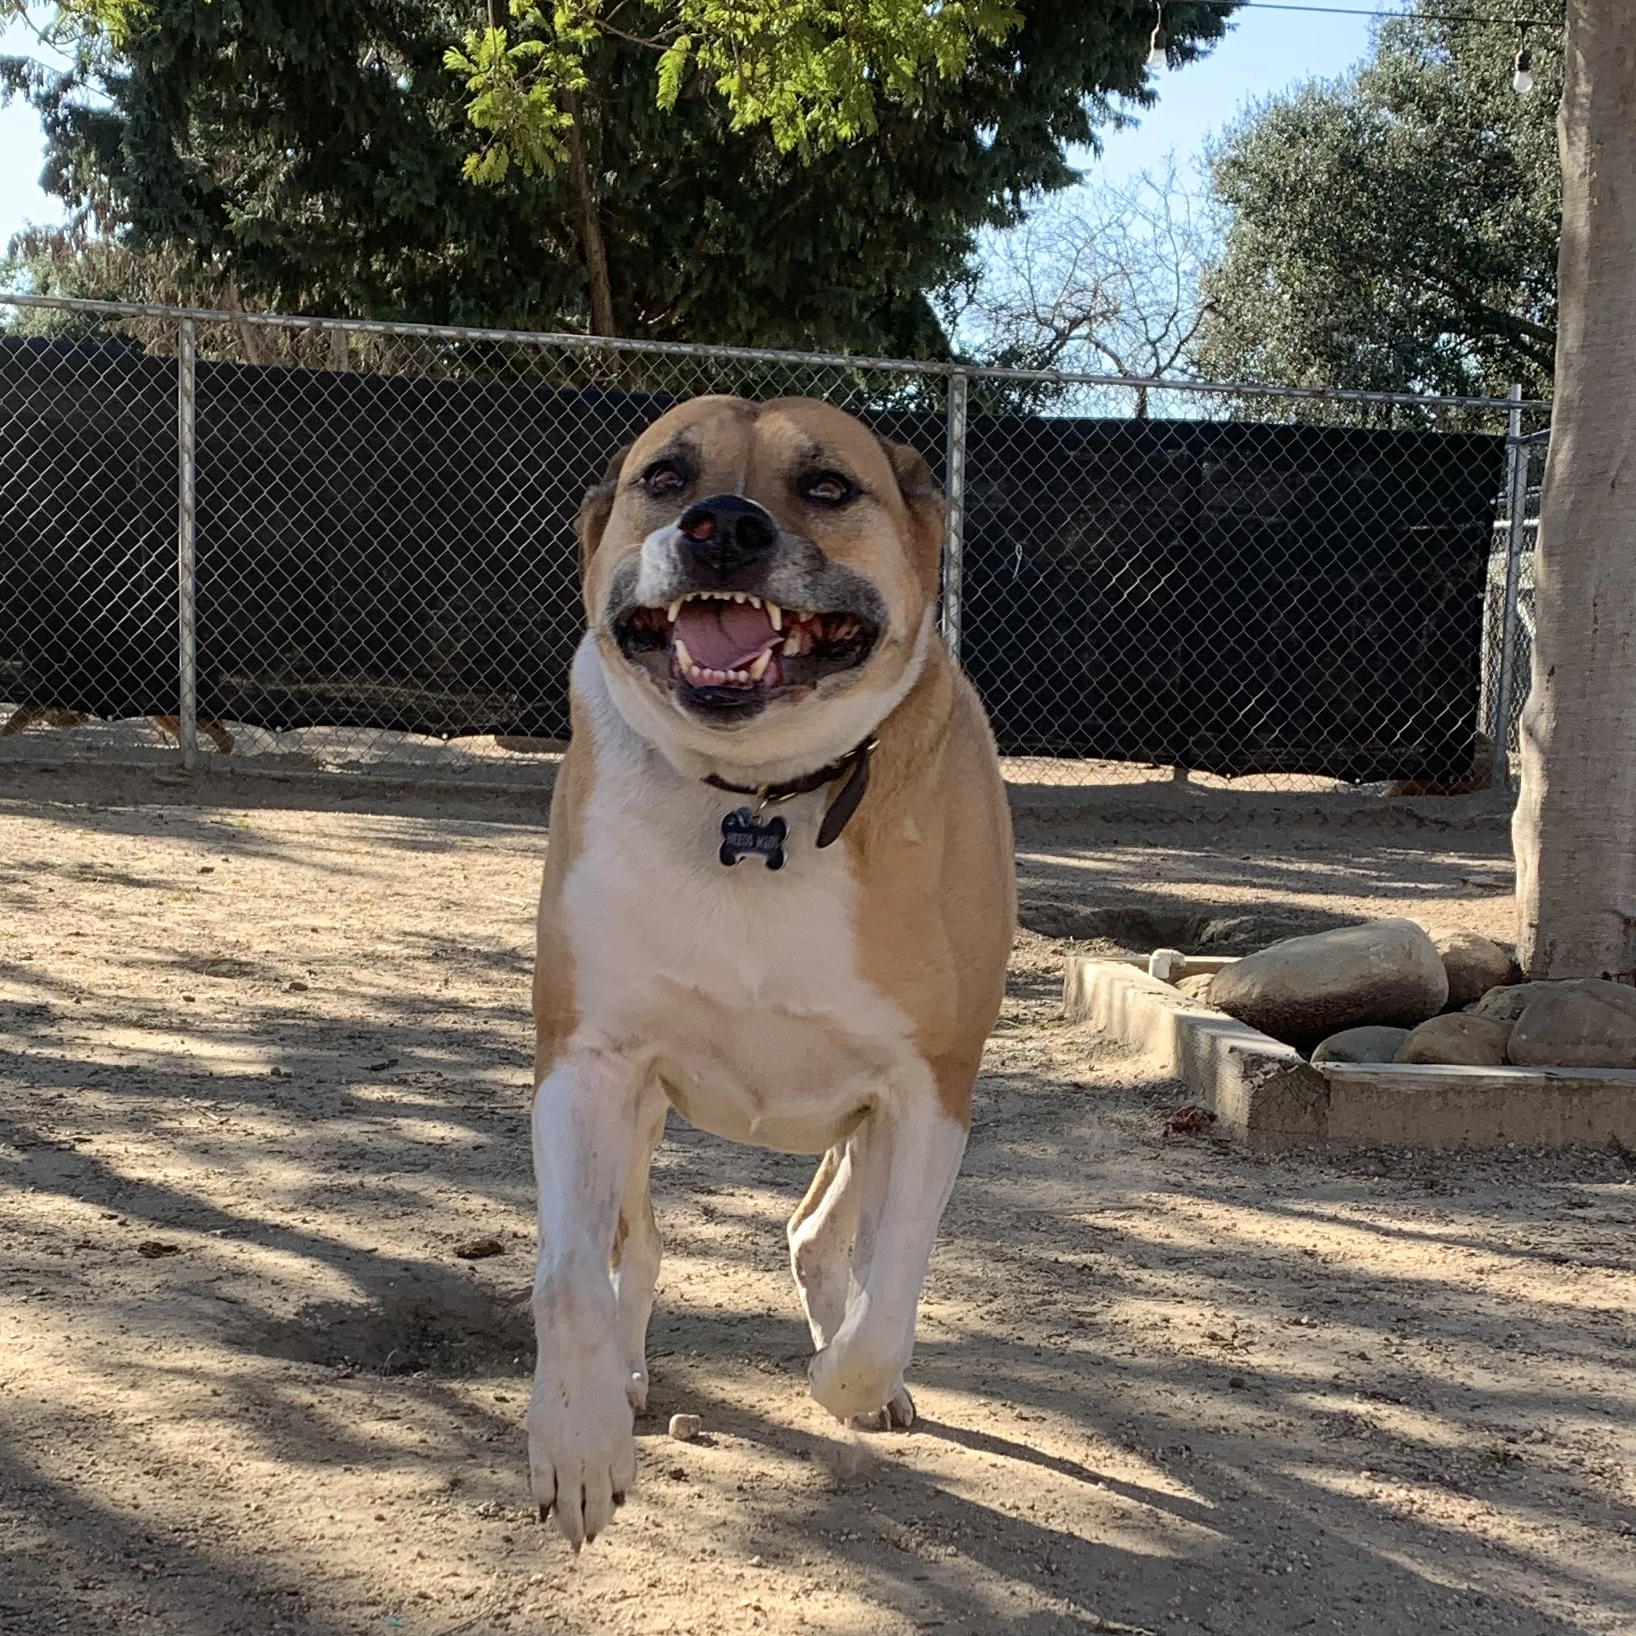 Dog Ranch - Daycare and Boarding Services in Ventura California